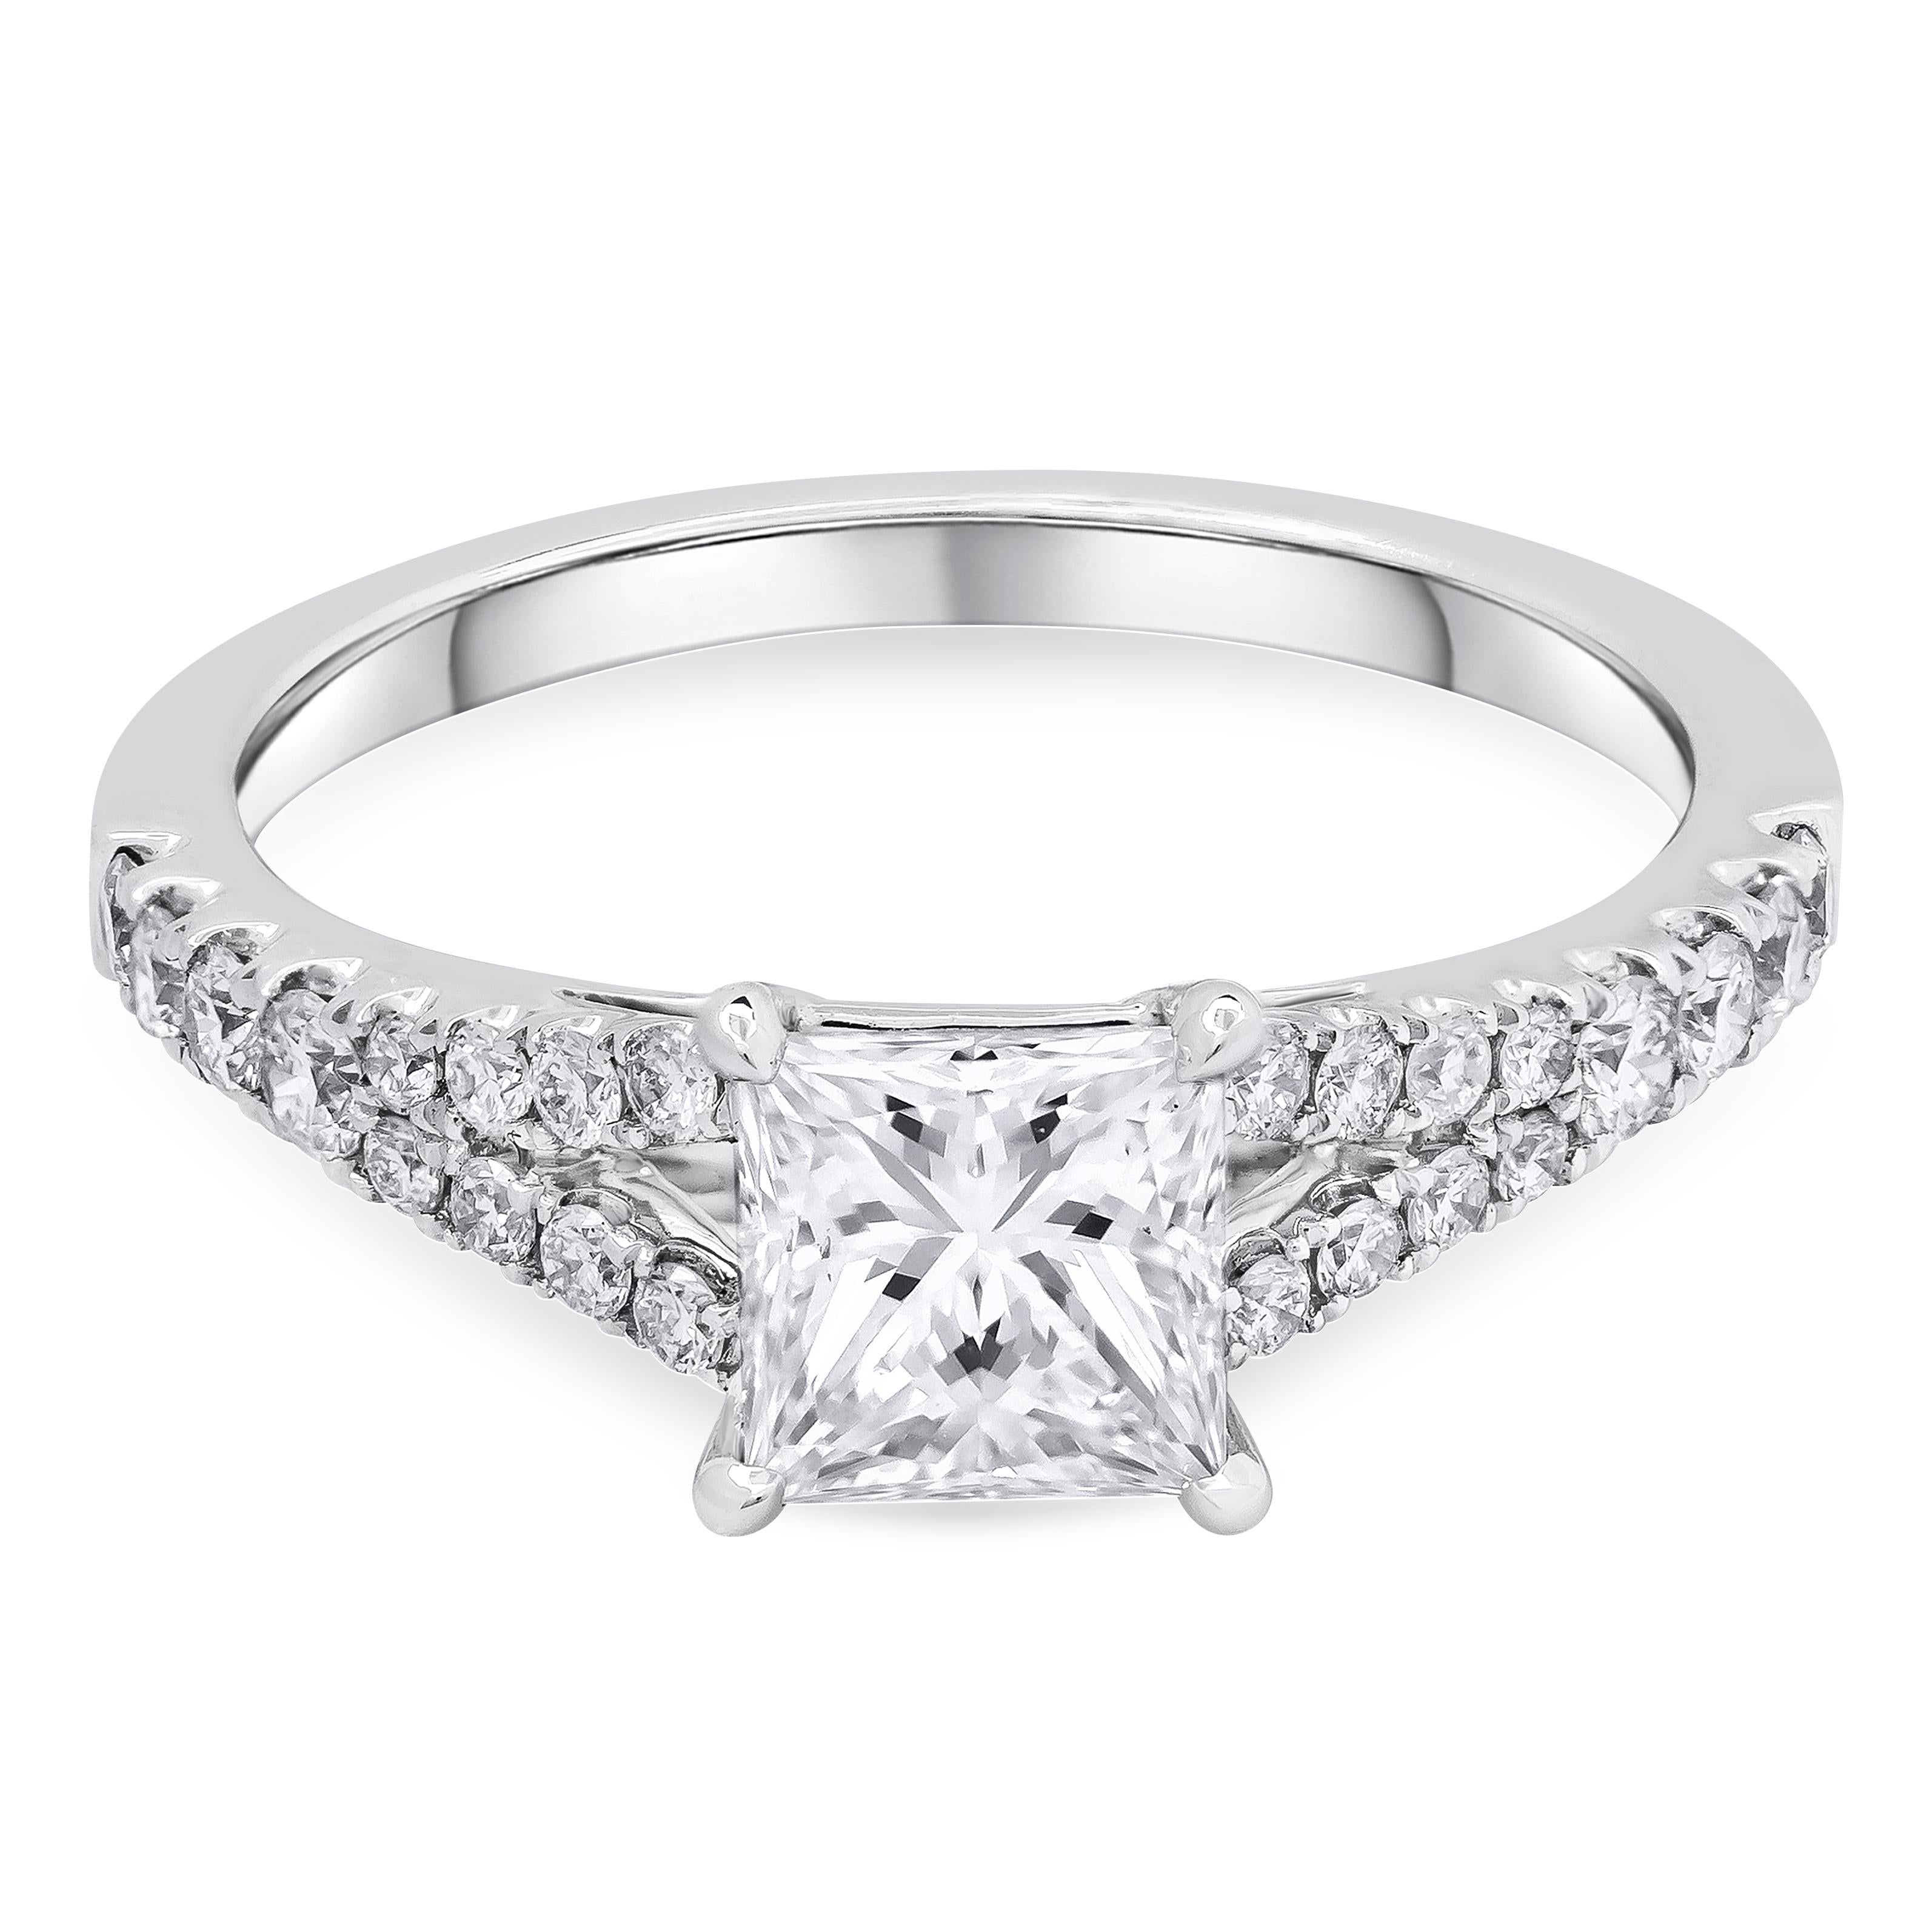 Showcasing a 1.06 carats princess cut diamond center stone takes the spotlight in this 18k white gold setting certified by GIA as G color, VS1 in clarity. Set in a unique and chic split shank setting accented with 0.77 carats total. Finely made in